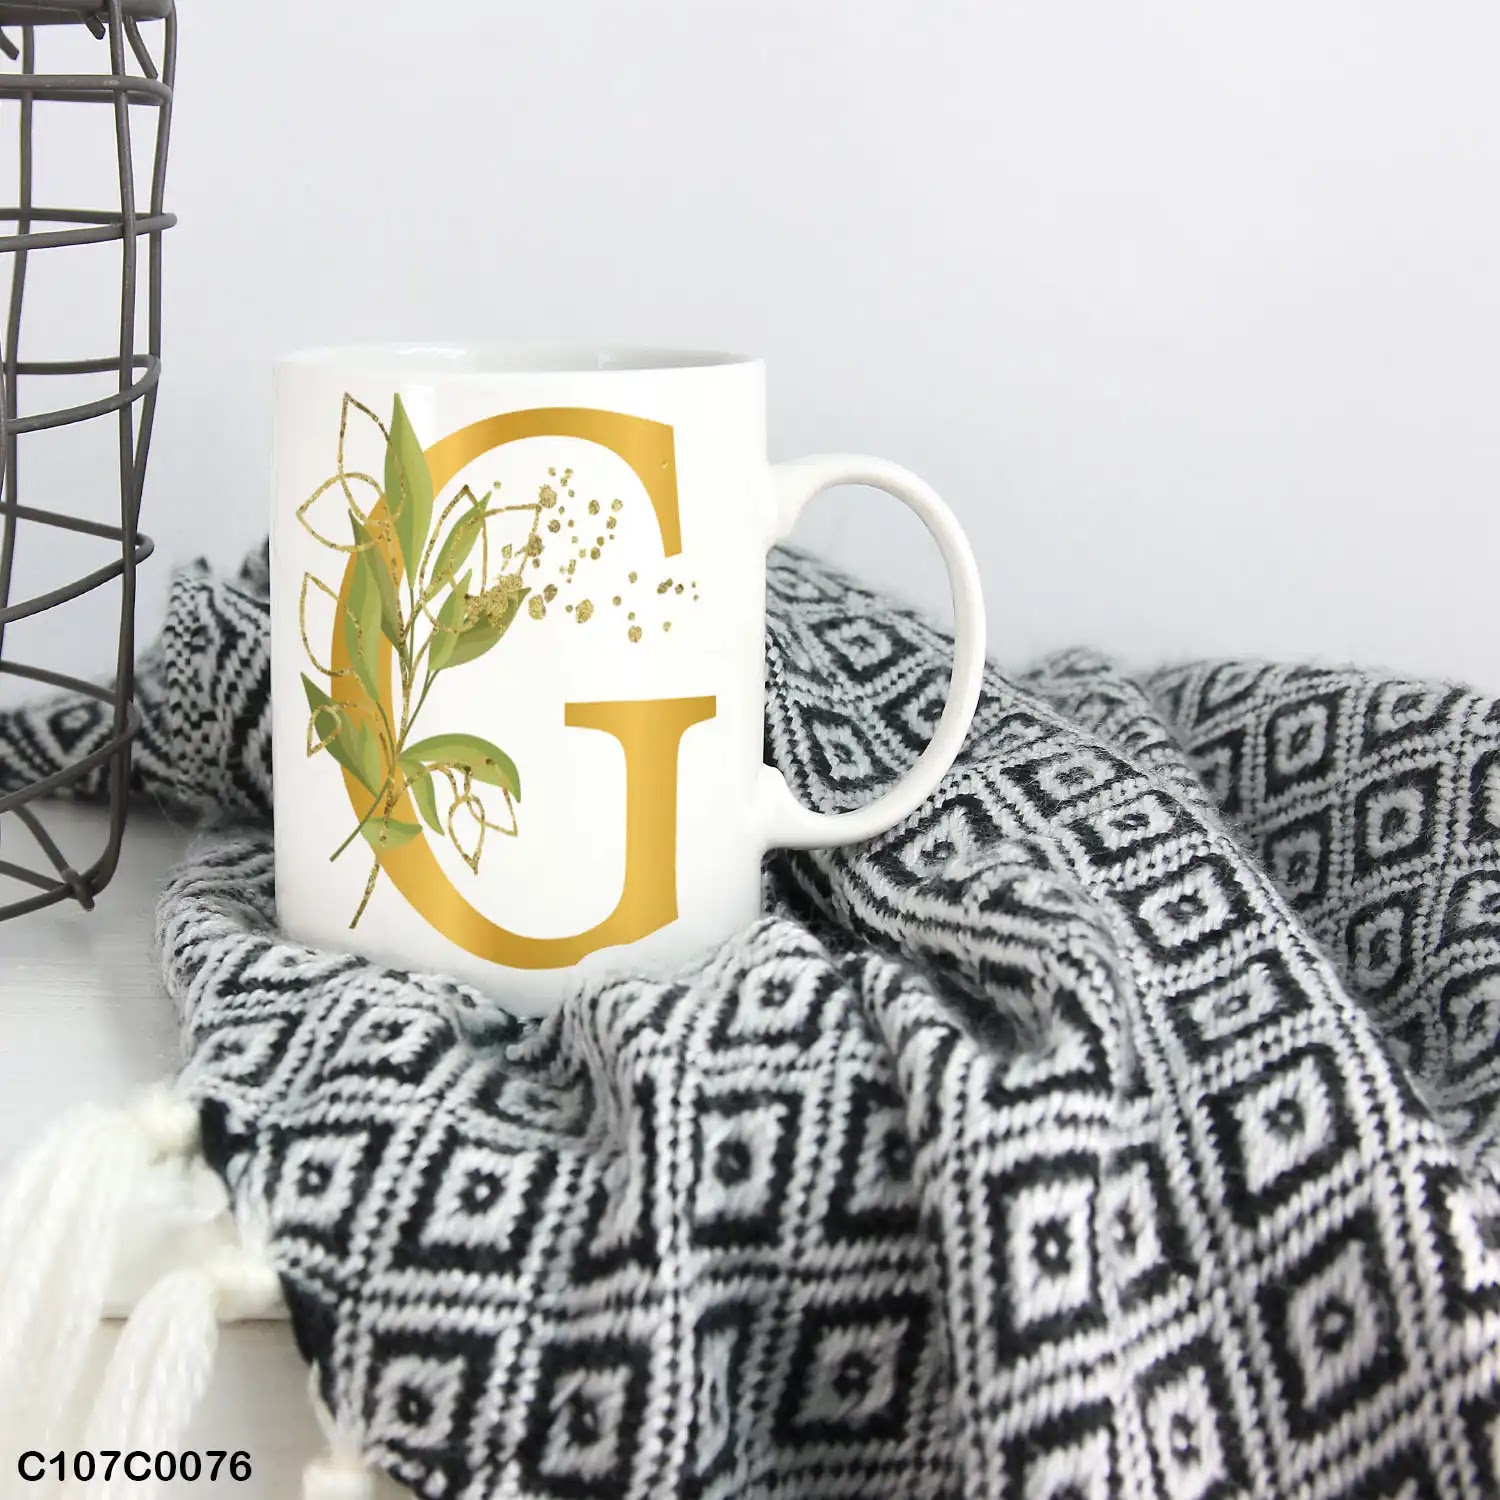 A white mug (cup) printed with gold Letter "G" and small green branch